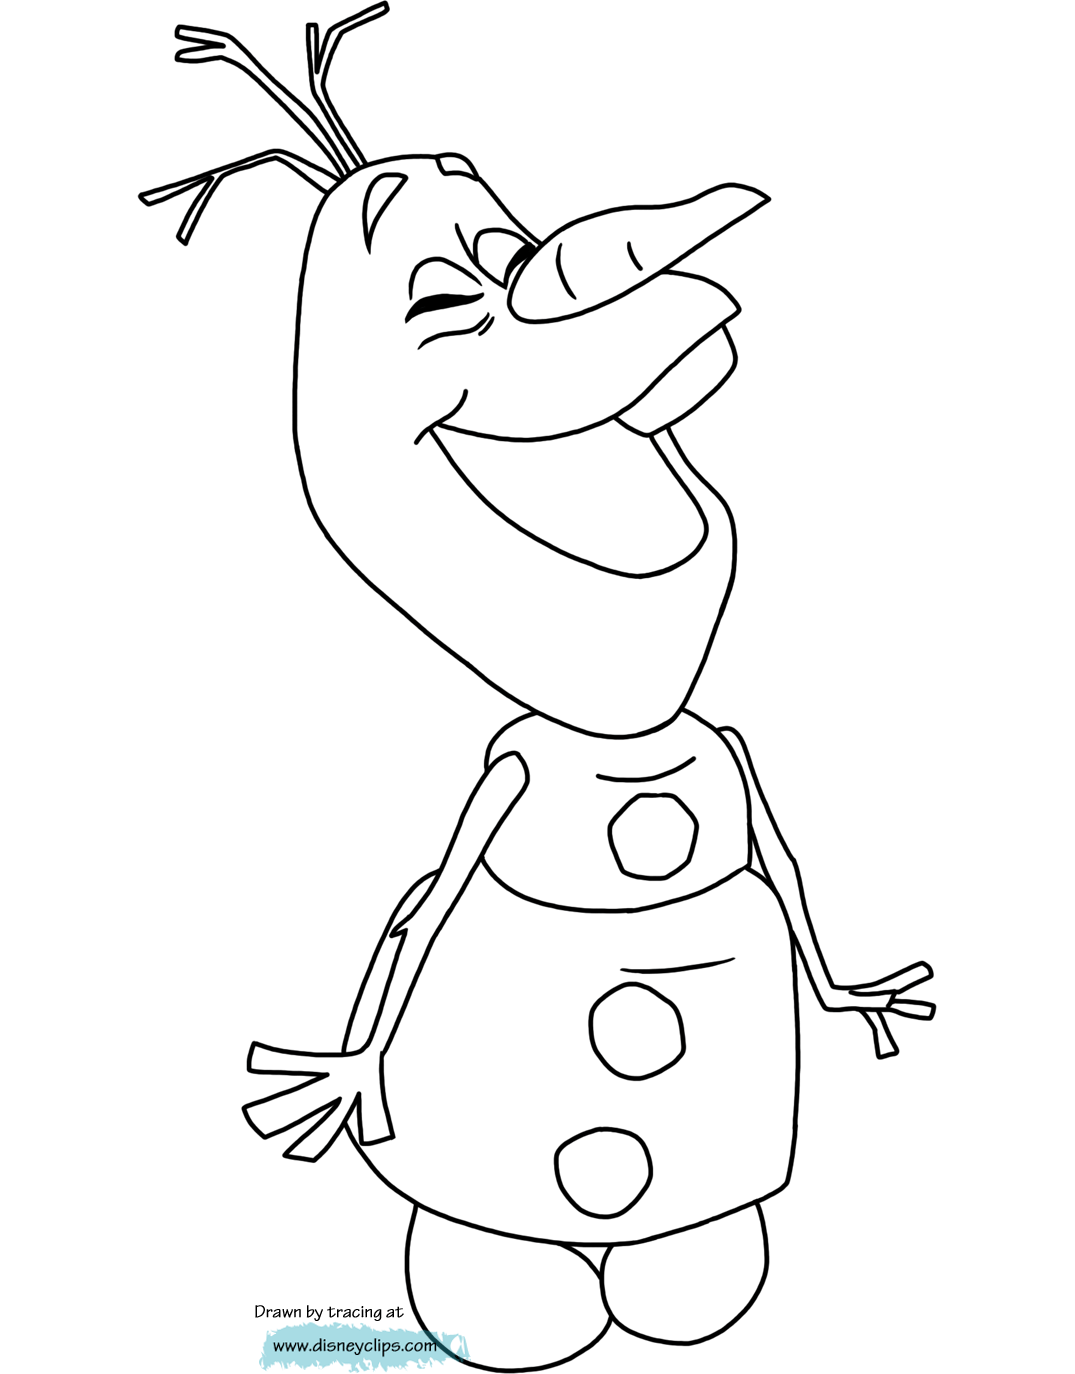 Coloring Page Of Olaf From Disney S Frozen Olaf Frozen My Xxx Hot Girl